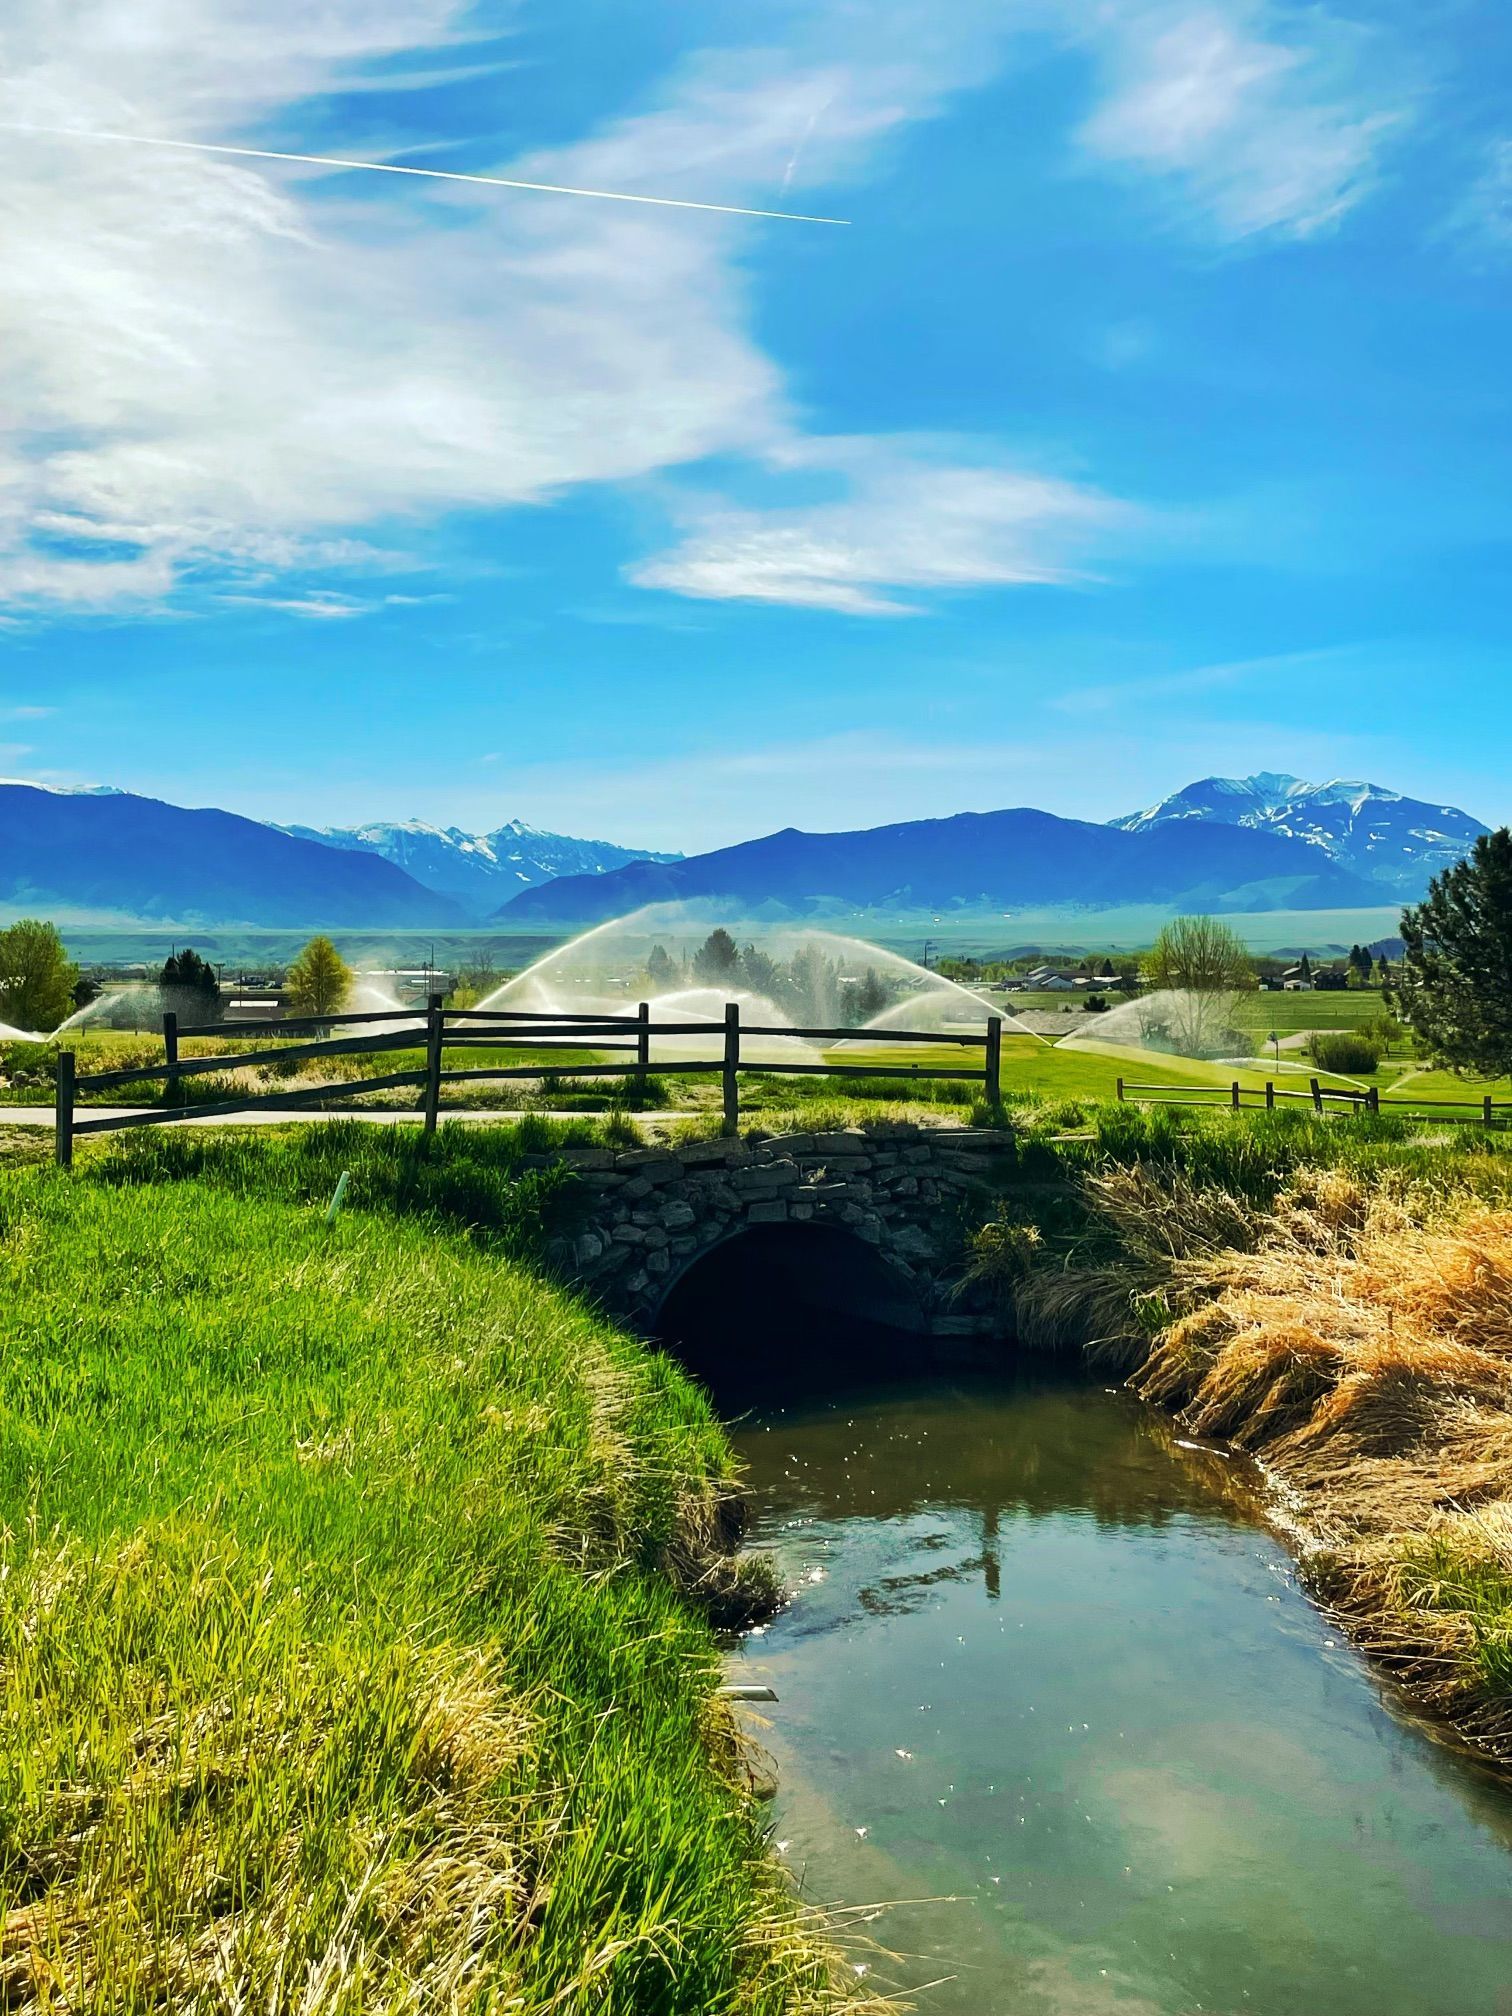 A bridge over a stream in a field with mountains in the background.